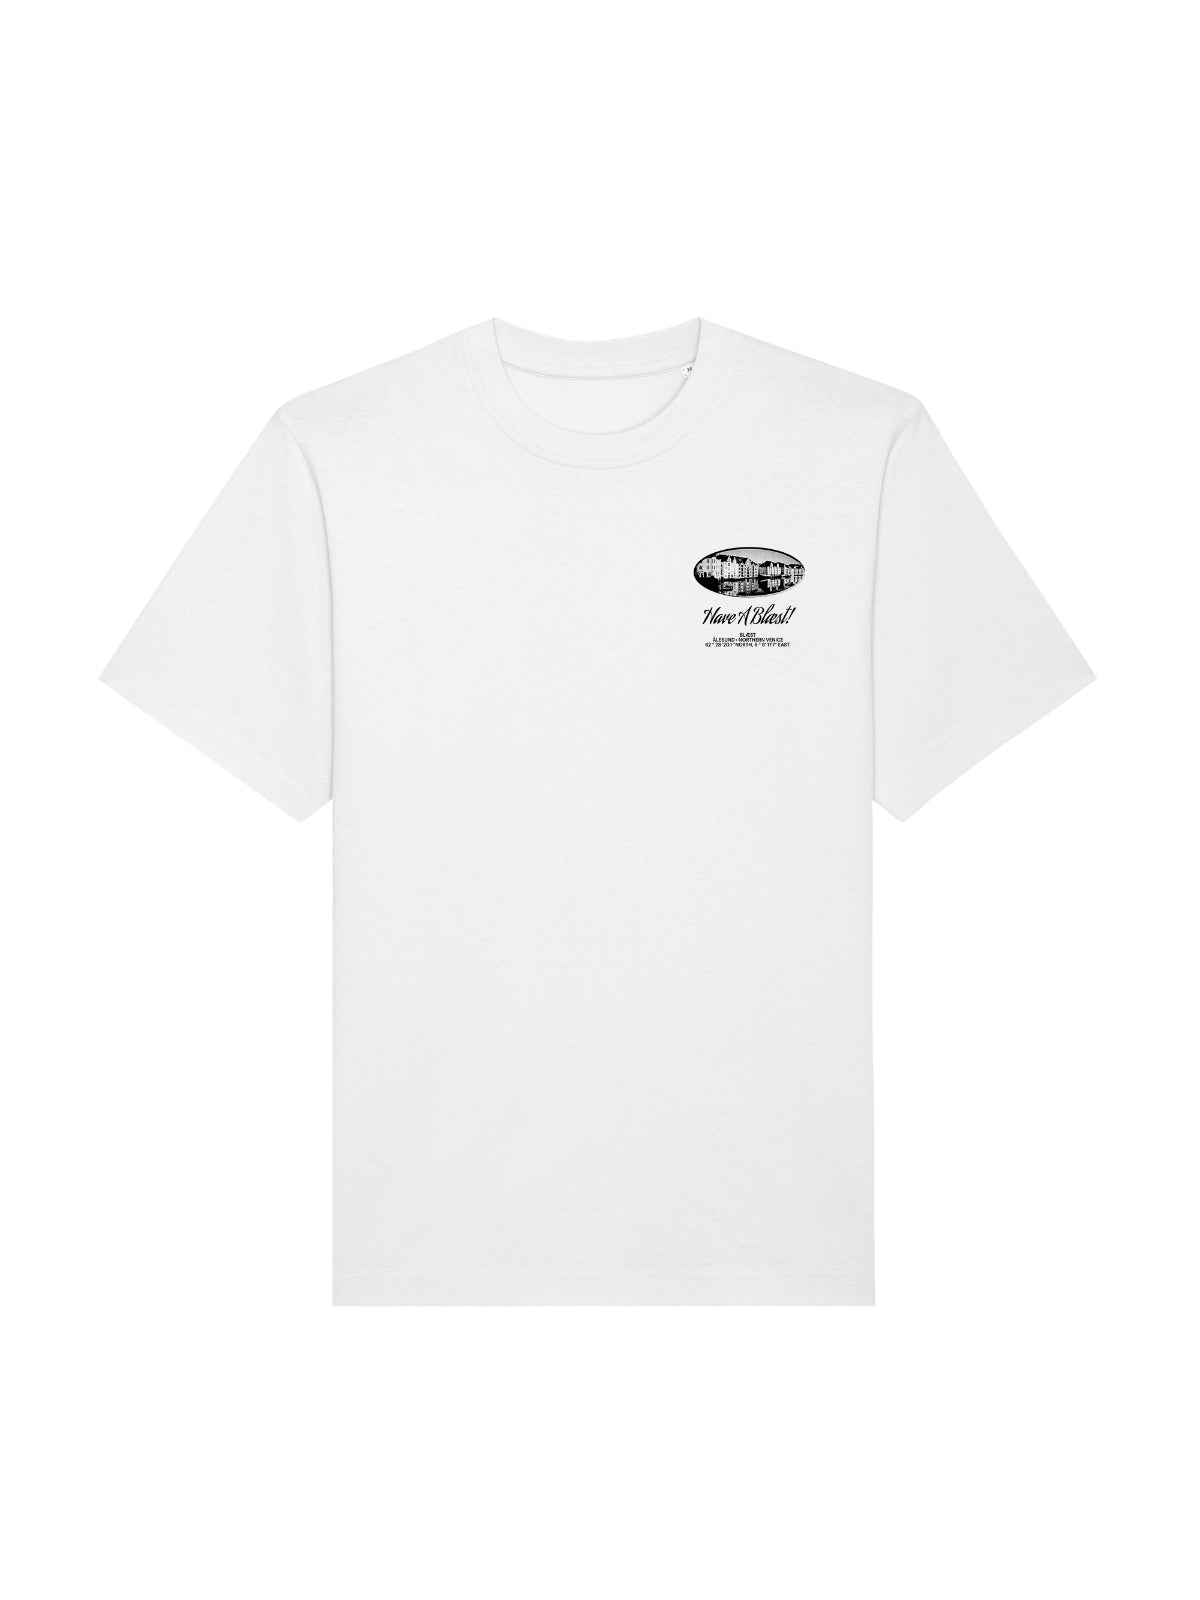 Have A Blæst - Merch in White